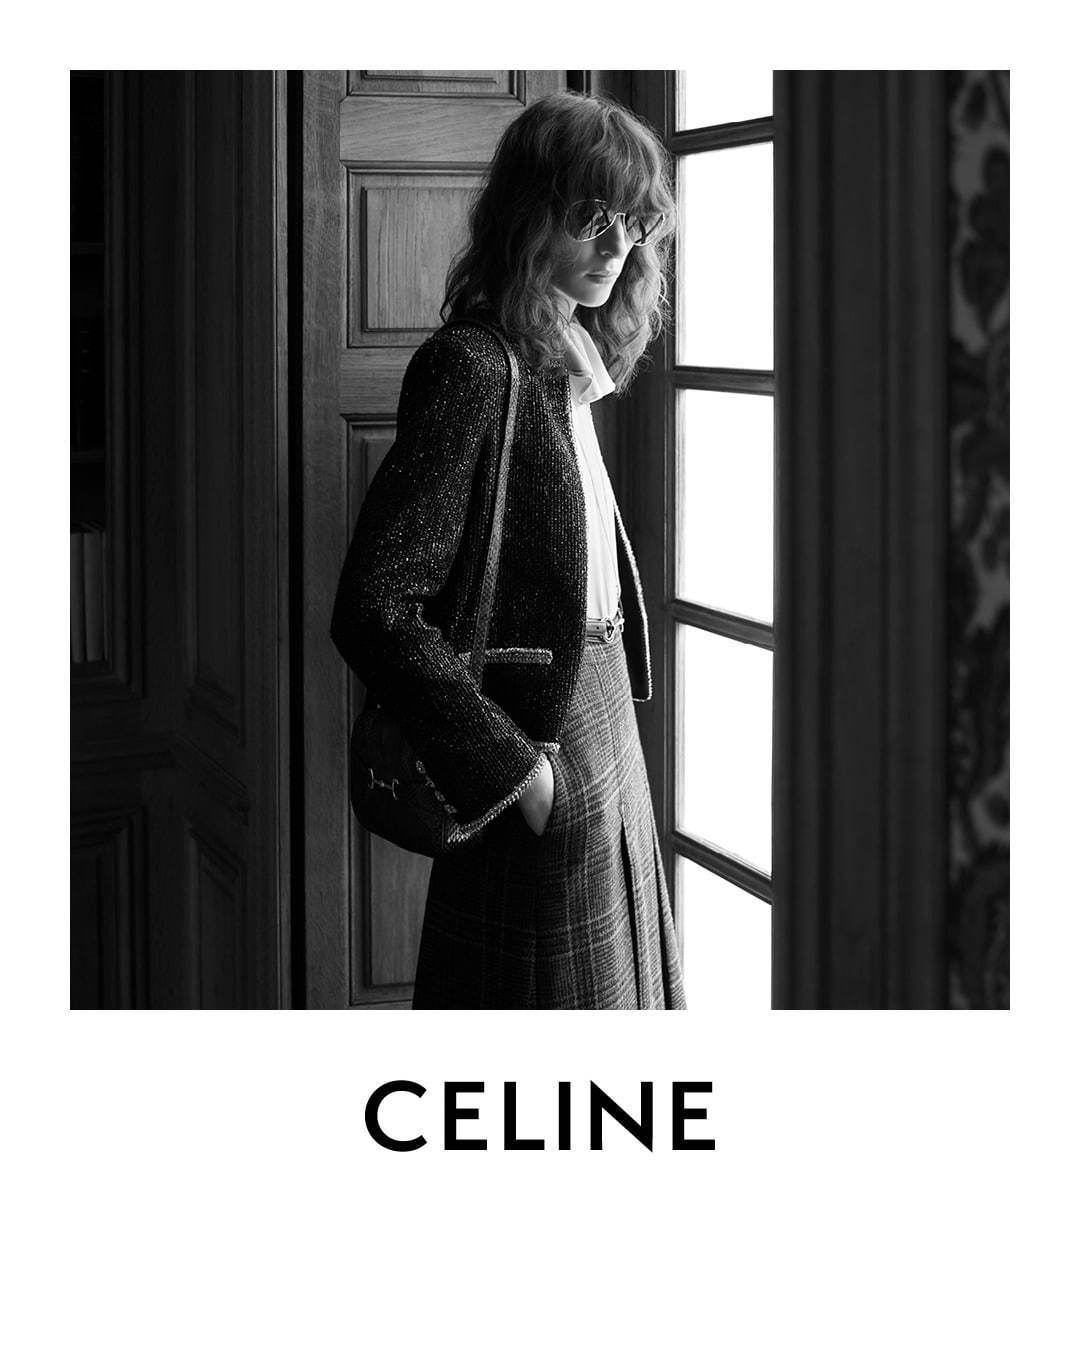 THE "16" COLLECTION
CELINE WINTER 2019